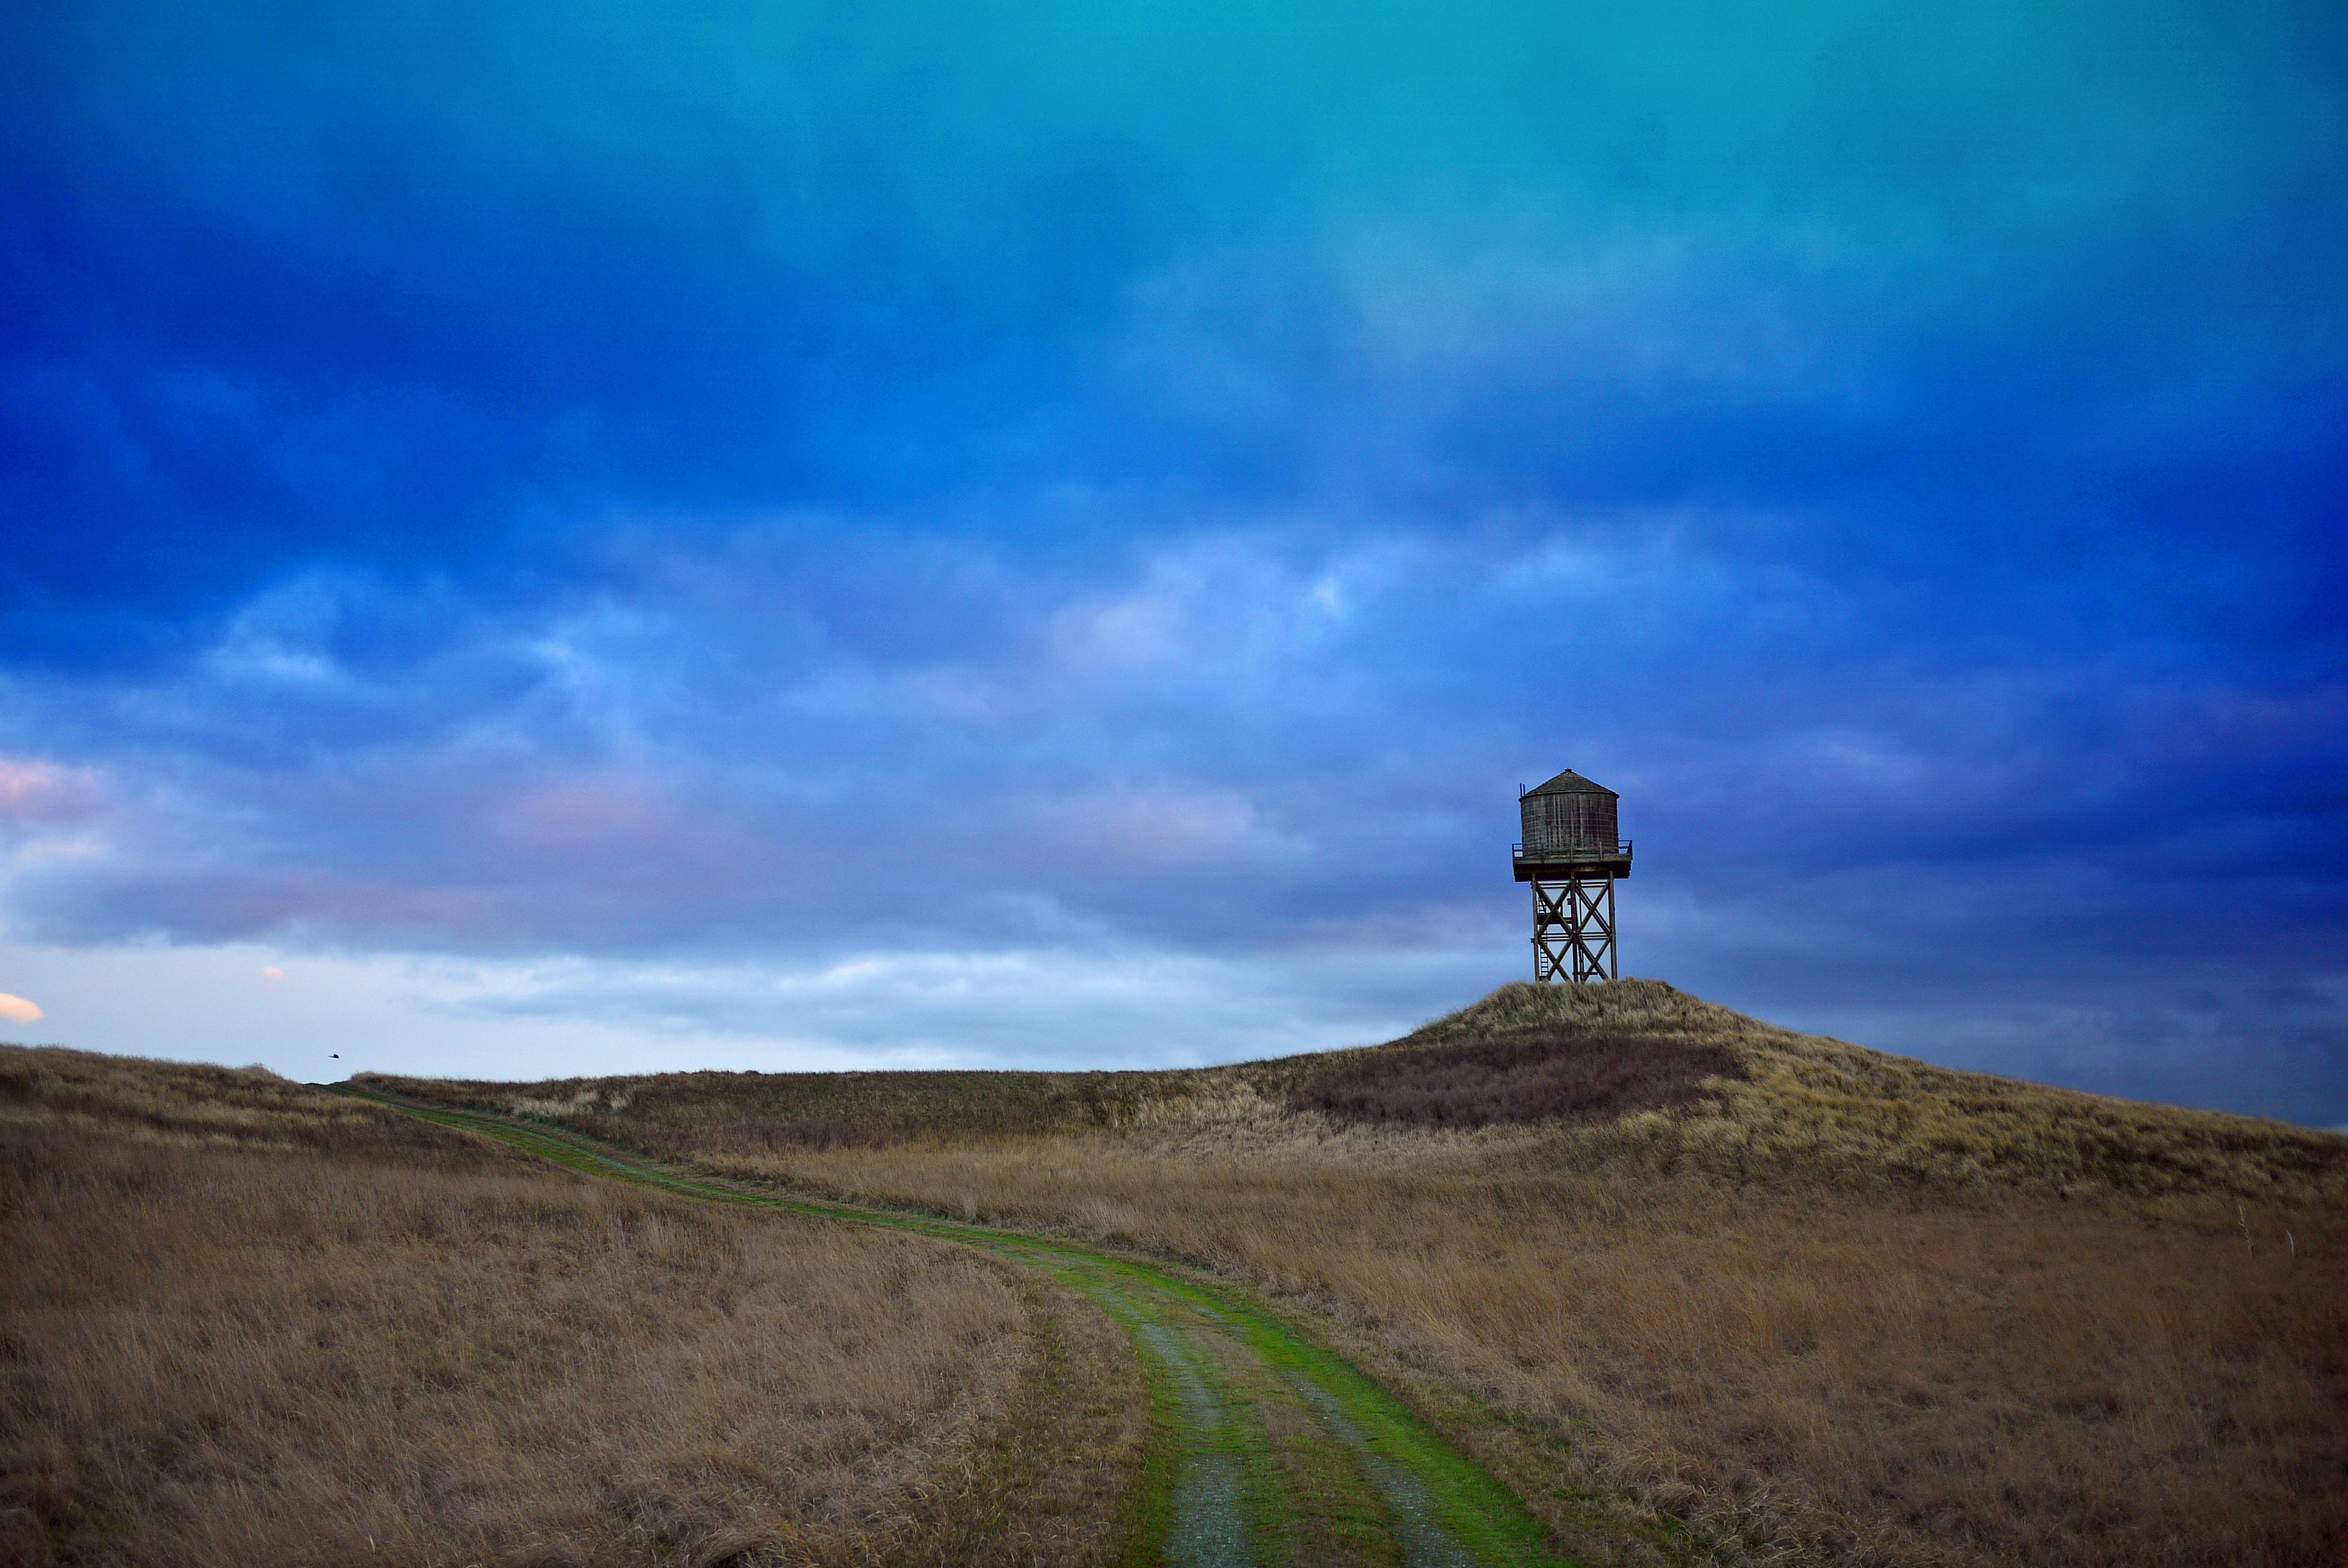 Protection Island Uplands with Historic Watertower